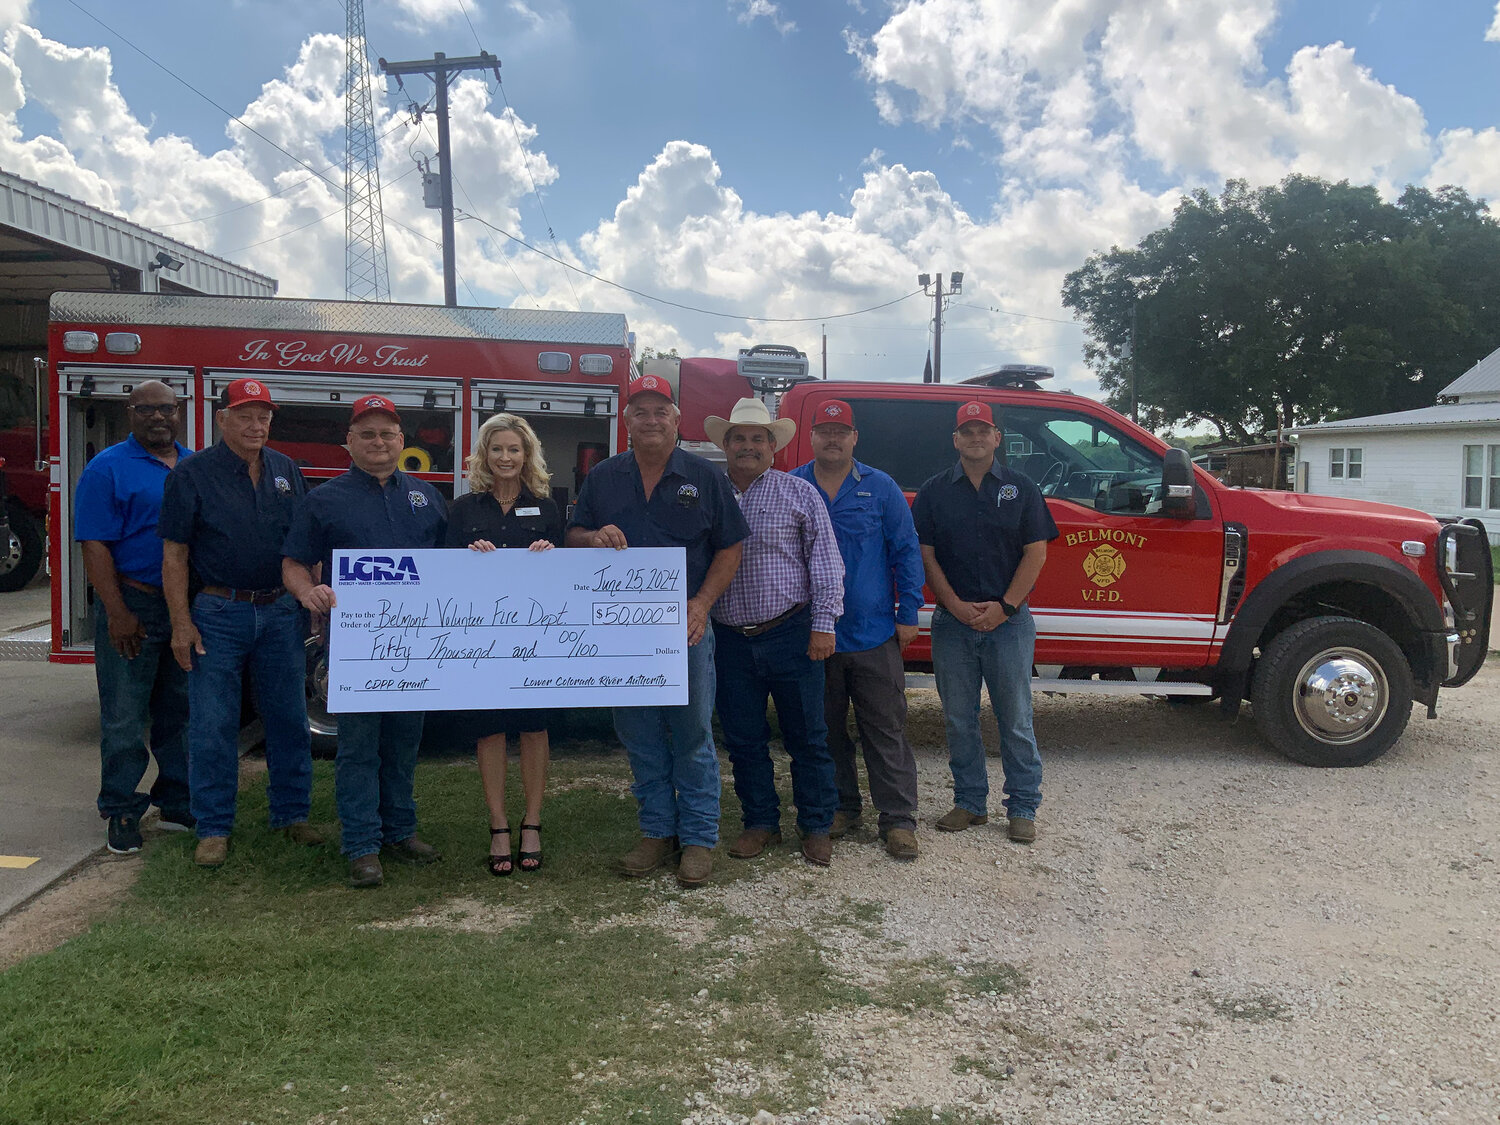 LCRA representatives present a $50,000 grant to the Belmont Volunteer Fire Department for a new mini pumper truck and vehicle extrication equipment. The grant is part of LCRA’s Community Development Partnership Program. Pictured, from left to right, are: Rick Arnic, LCRA Regional Affairs representative; Kenneth Schauer, Belmont VFD captain; Jay Tinsley, first assistant fire chief; Margaret D. “Meg” Voelter, LCRA Board member; Brian Schauer, fire chief; Kevin T. La Fleur, Gonzales County Commissioner, Precinct 3; and Austin McDonald and John DuBose III, firefighter.